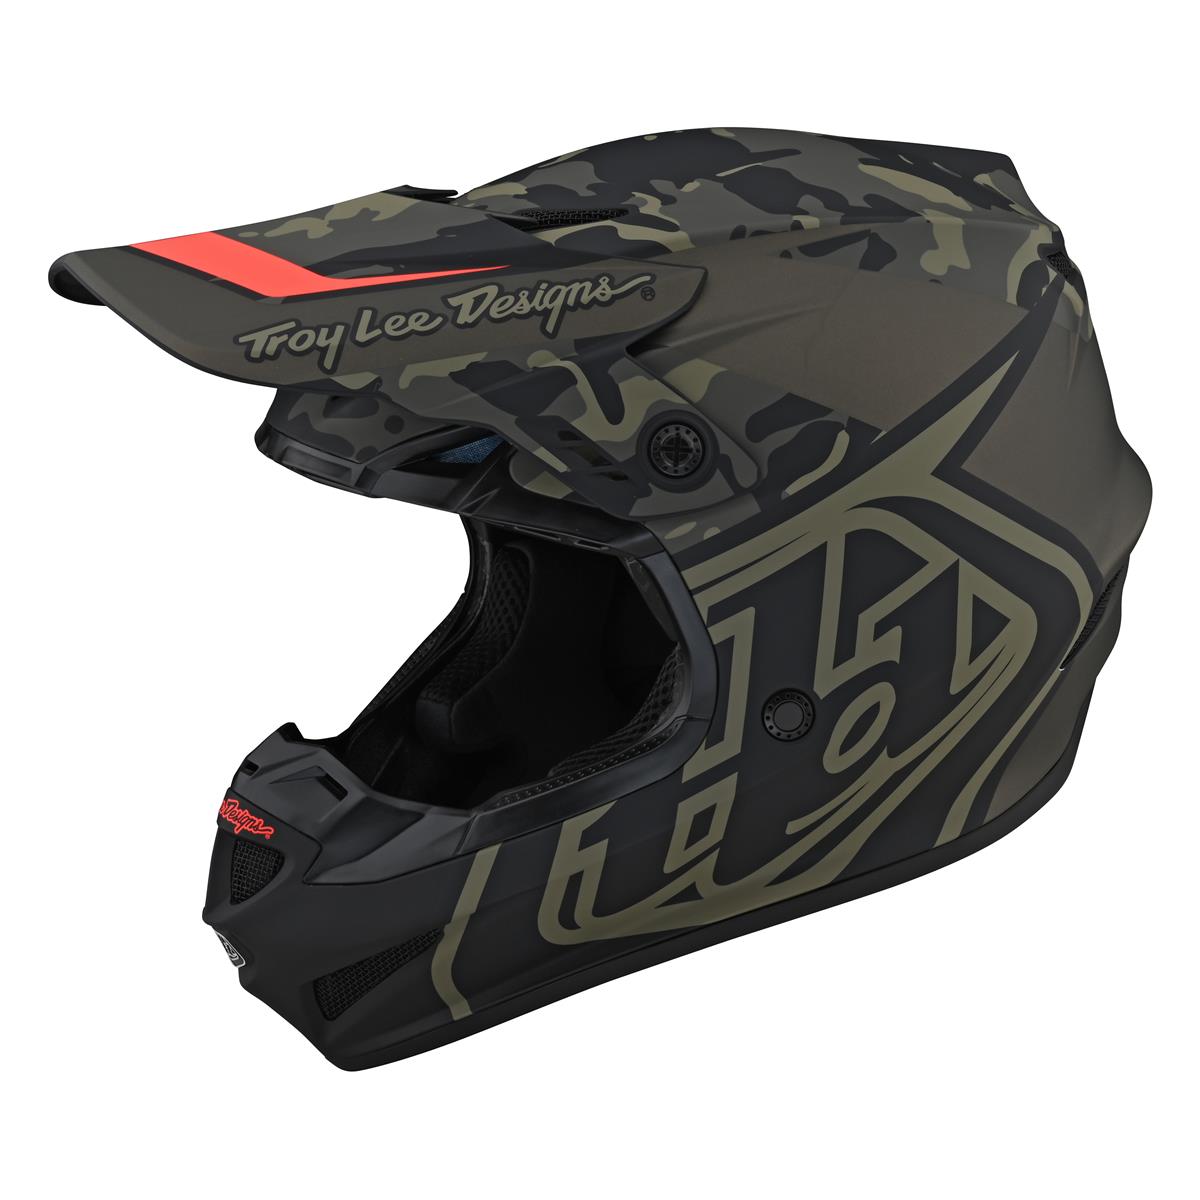 Troy Lee Designs Motocross-Helm GP Overload - Camo Army Green/Gray